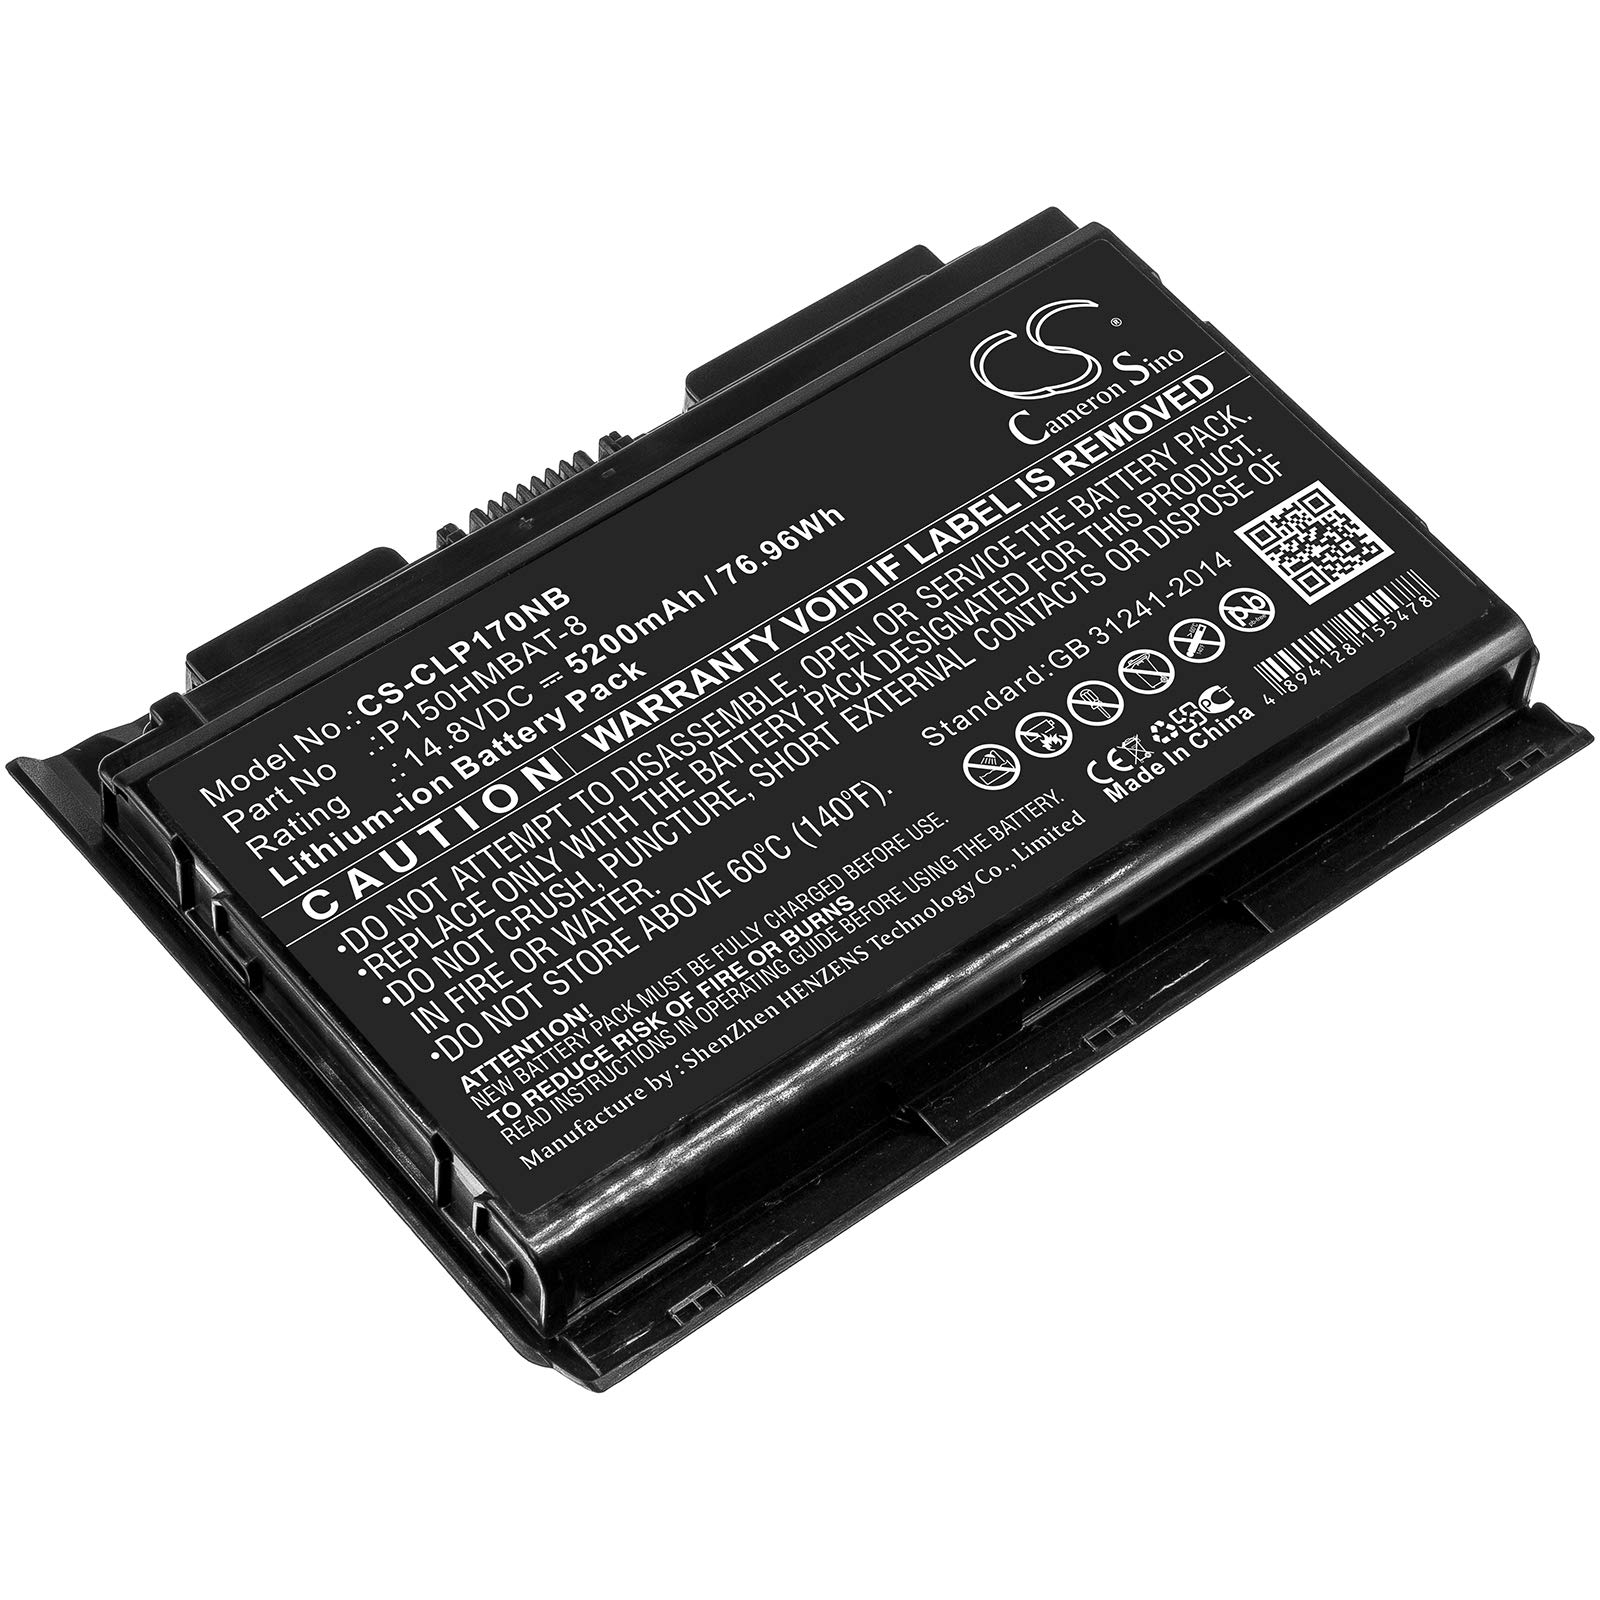 XPS Replacement Battery for Sc_henker XMG P502 PRO, XMG P502, P170EM, XIRIOS W701, XMG P151HM1, XMG P702 PRO, P170SM, P170HM, XIRIOS W702